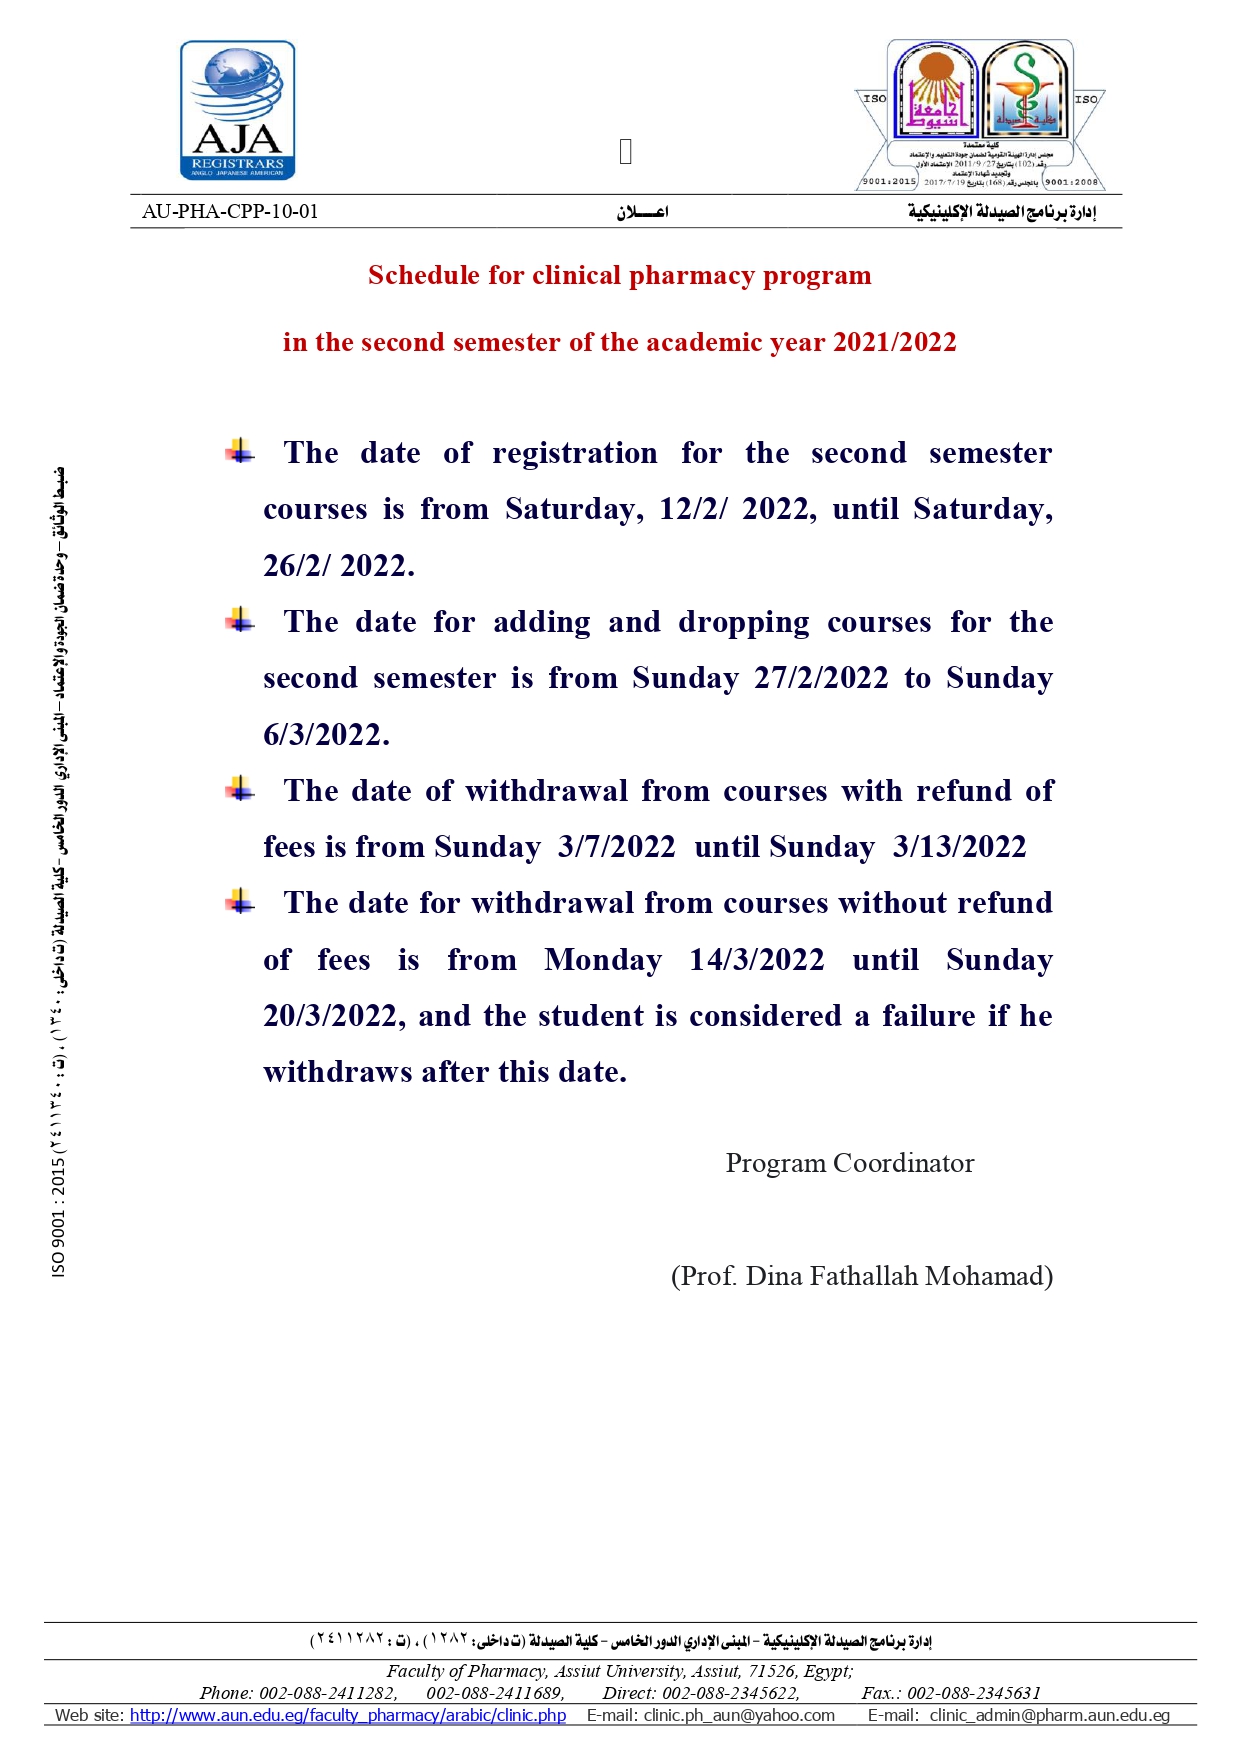  	Schedule for clinical pharmacy program in the second semester of the academic year 2021/2022